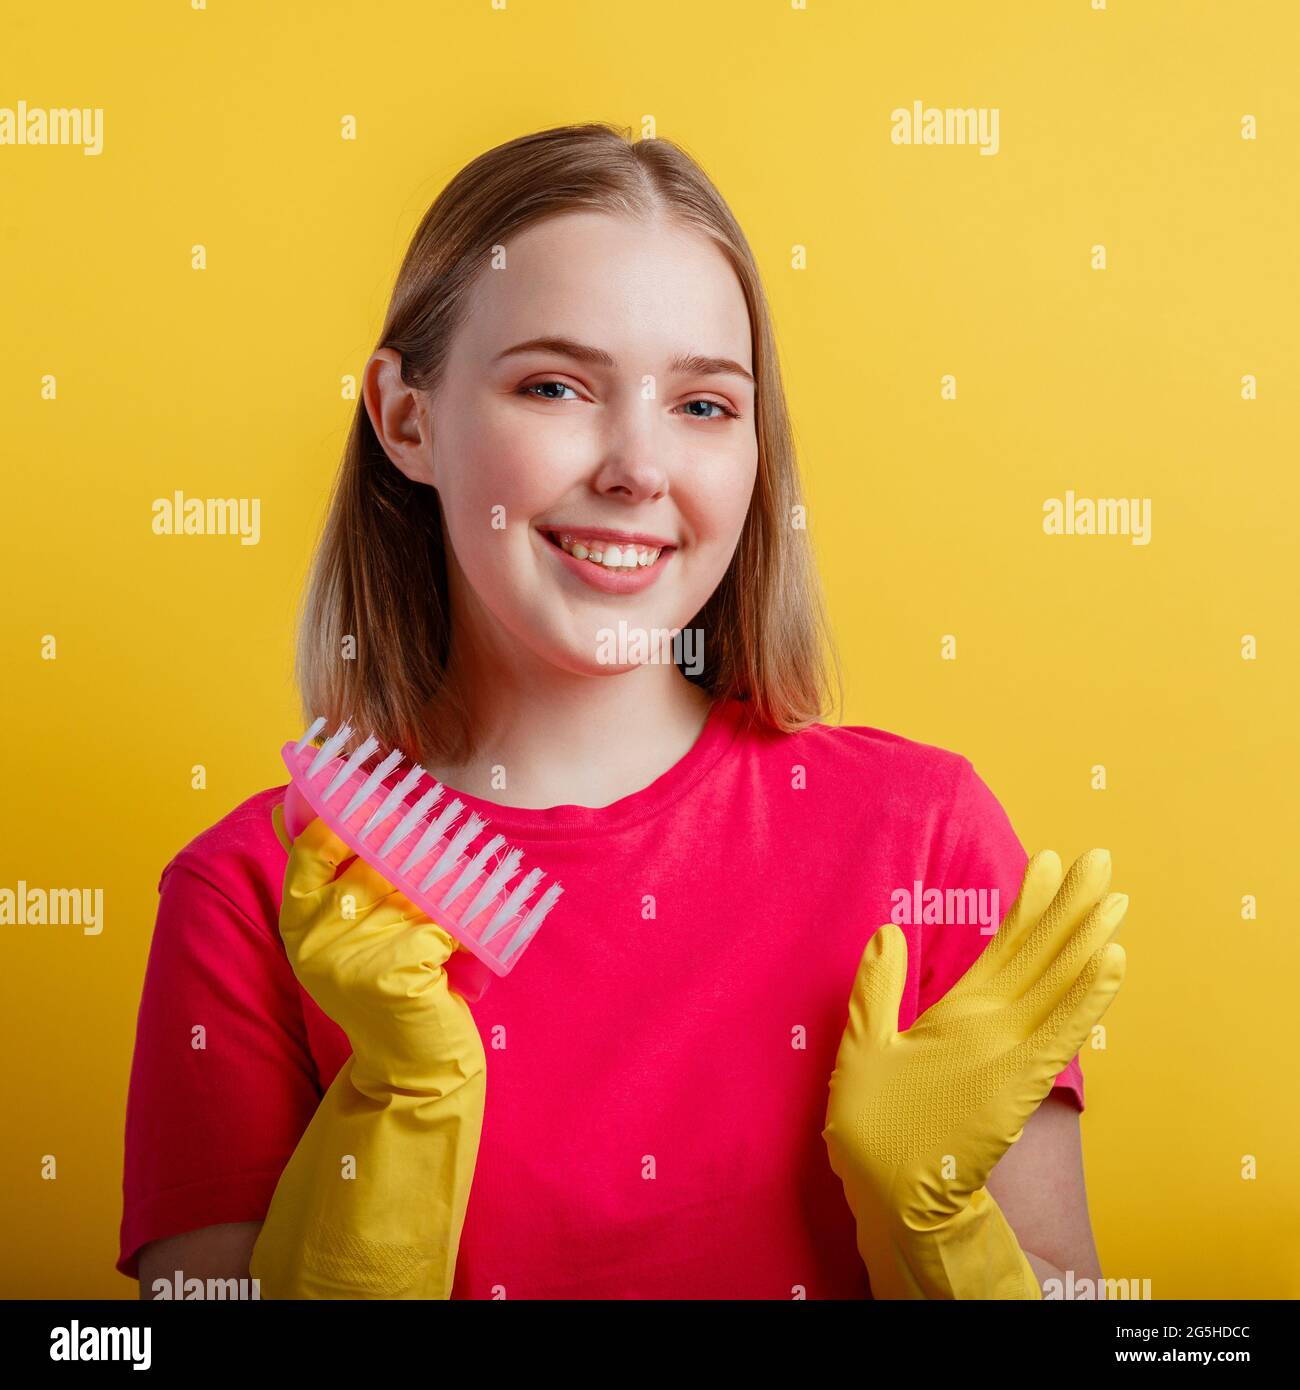 Woman Portrait with cleaning brush in rubber gloves. Young blonde happy smiling woman ready to cleaning house with household supplies isolated over Stock Photo